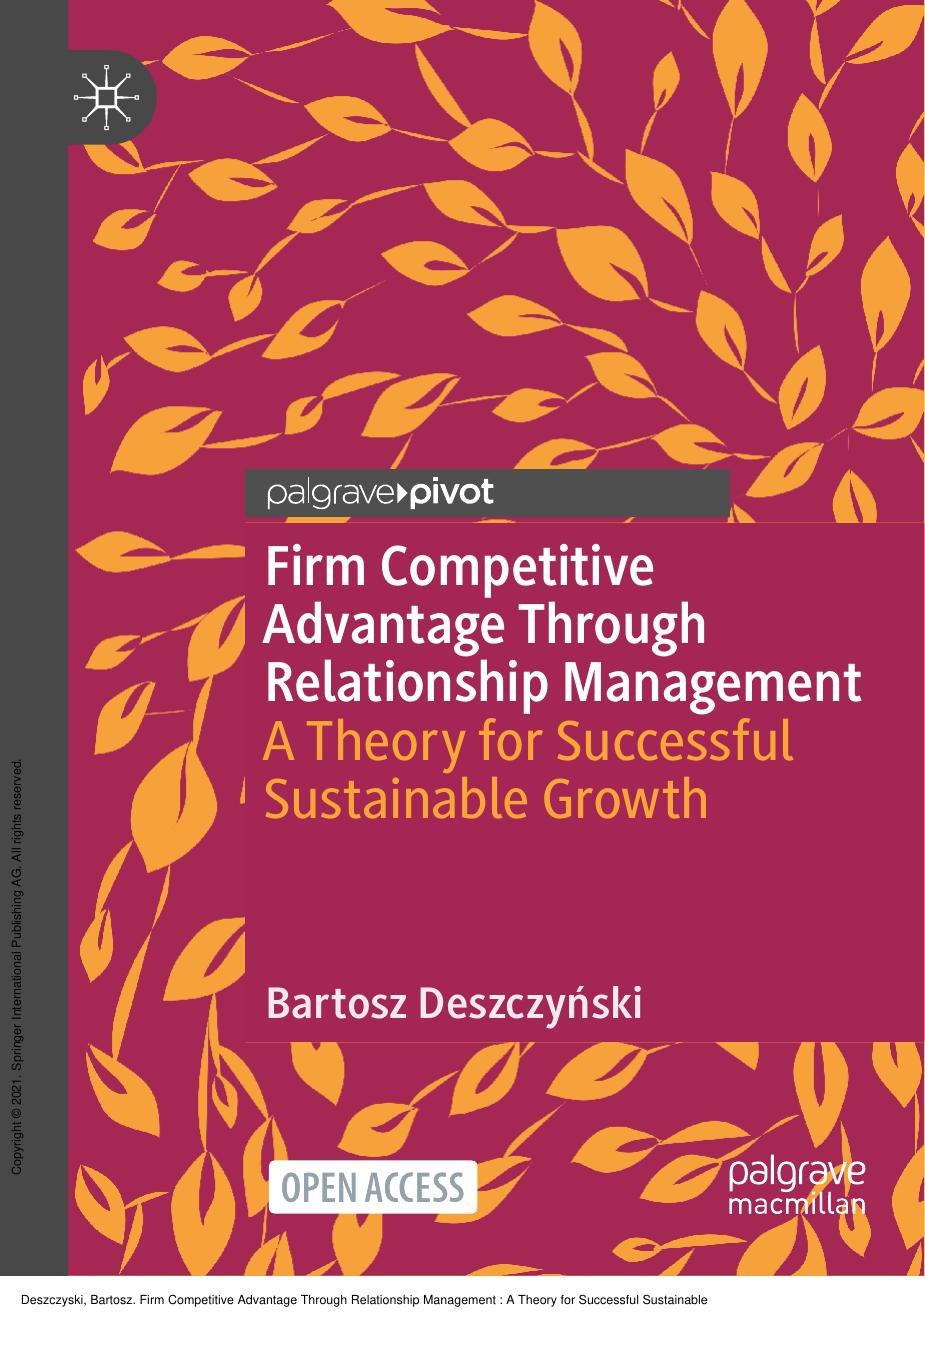 Firm Competitive Advantage Through Relationship Management : A Theory for Successful Sustainable Growth by Bartosz Deszczyński